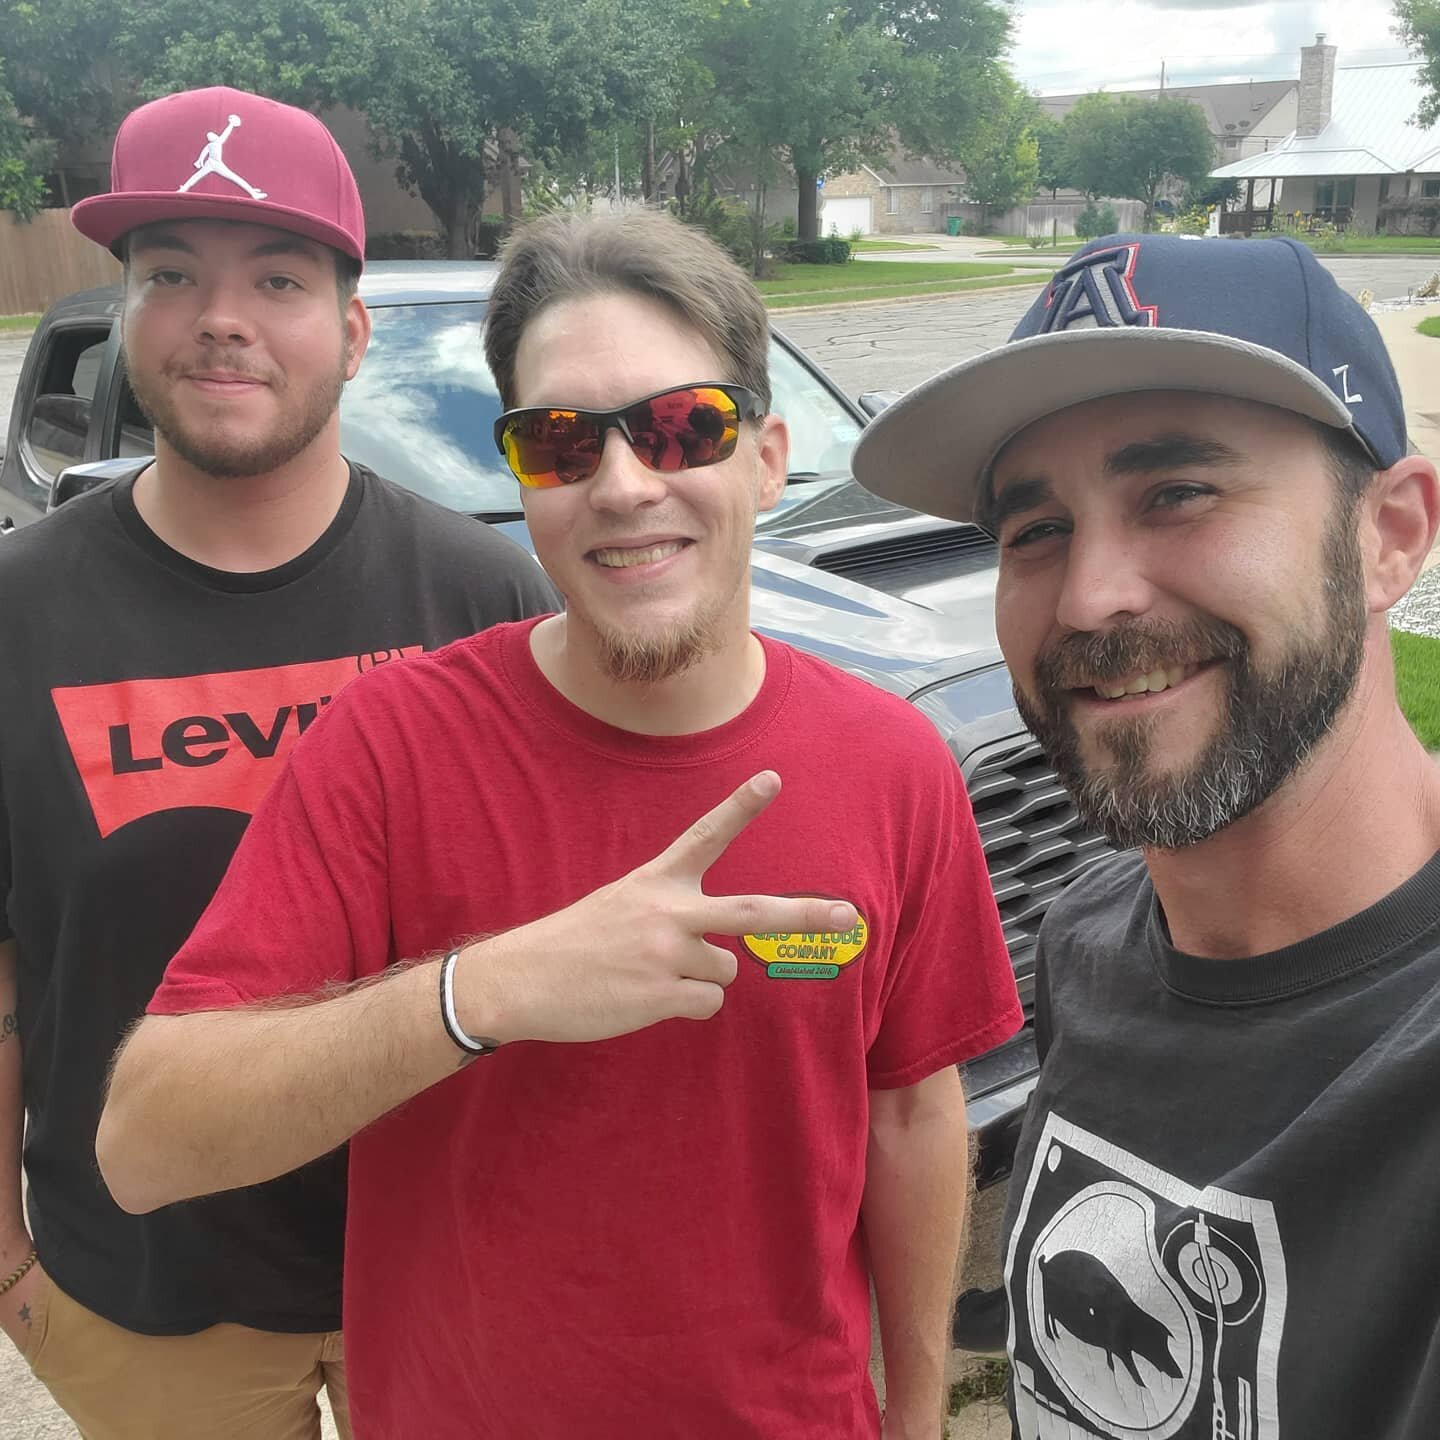 Very happy to meet Cody and provide a free #POWERTHIRST tune. When he told me his son suffers from #cysticfibrosis and he comes to Austin every few months to take him to Dell Children's Hospital, I told him that I'd do his tune free under one conditi